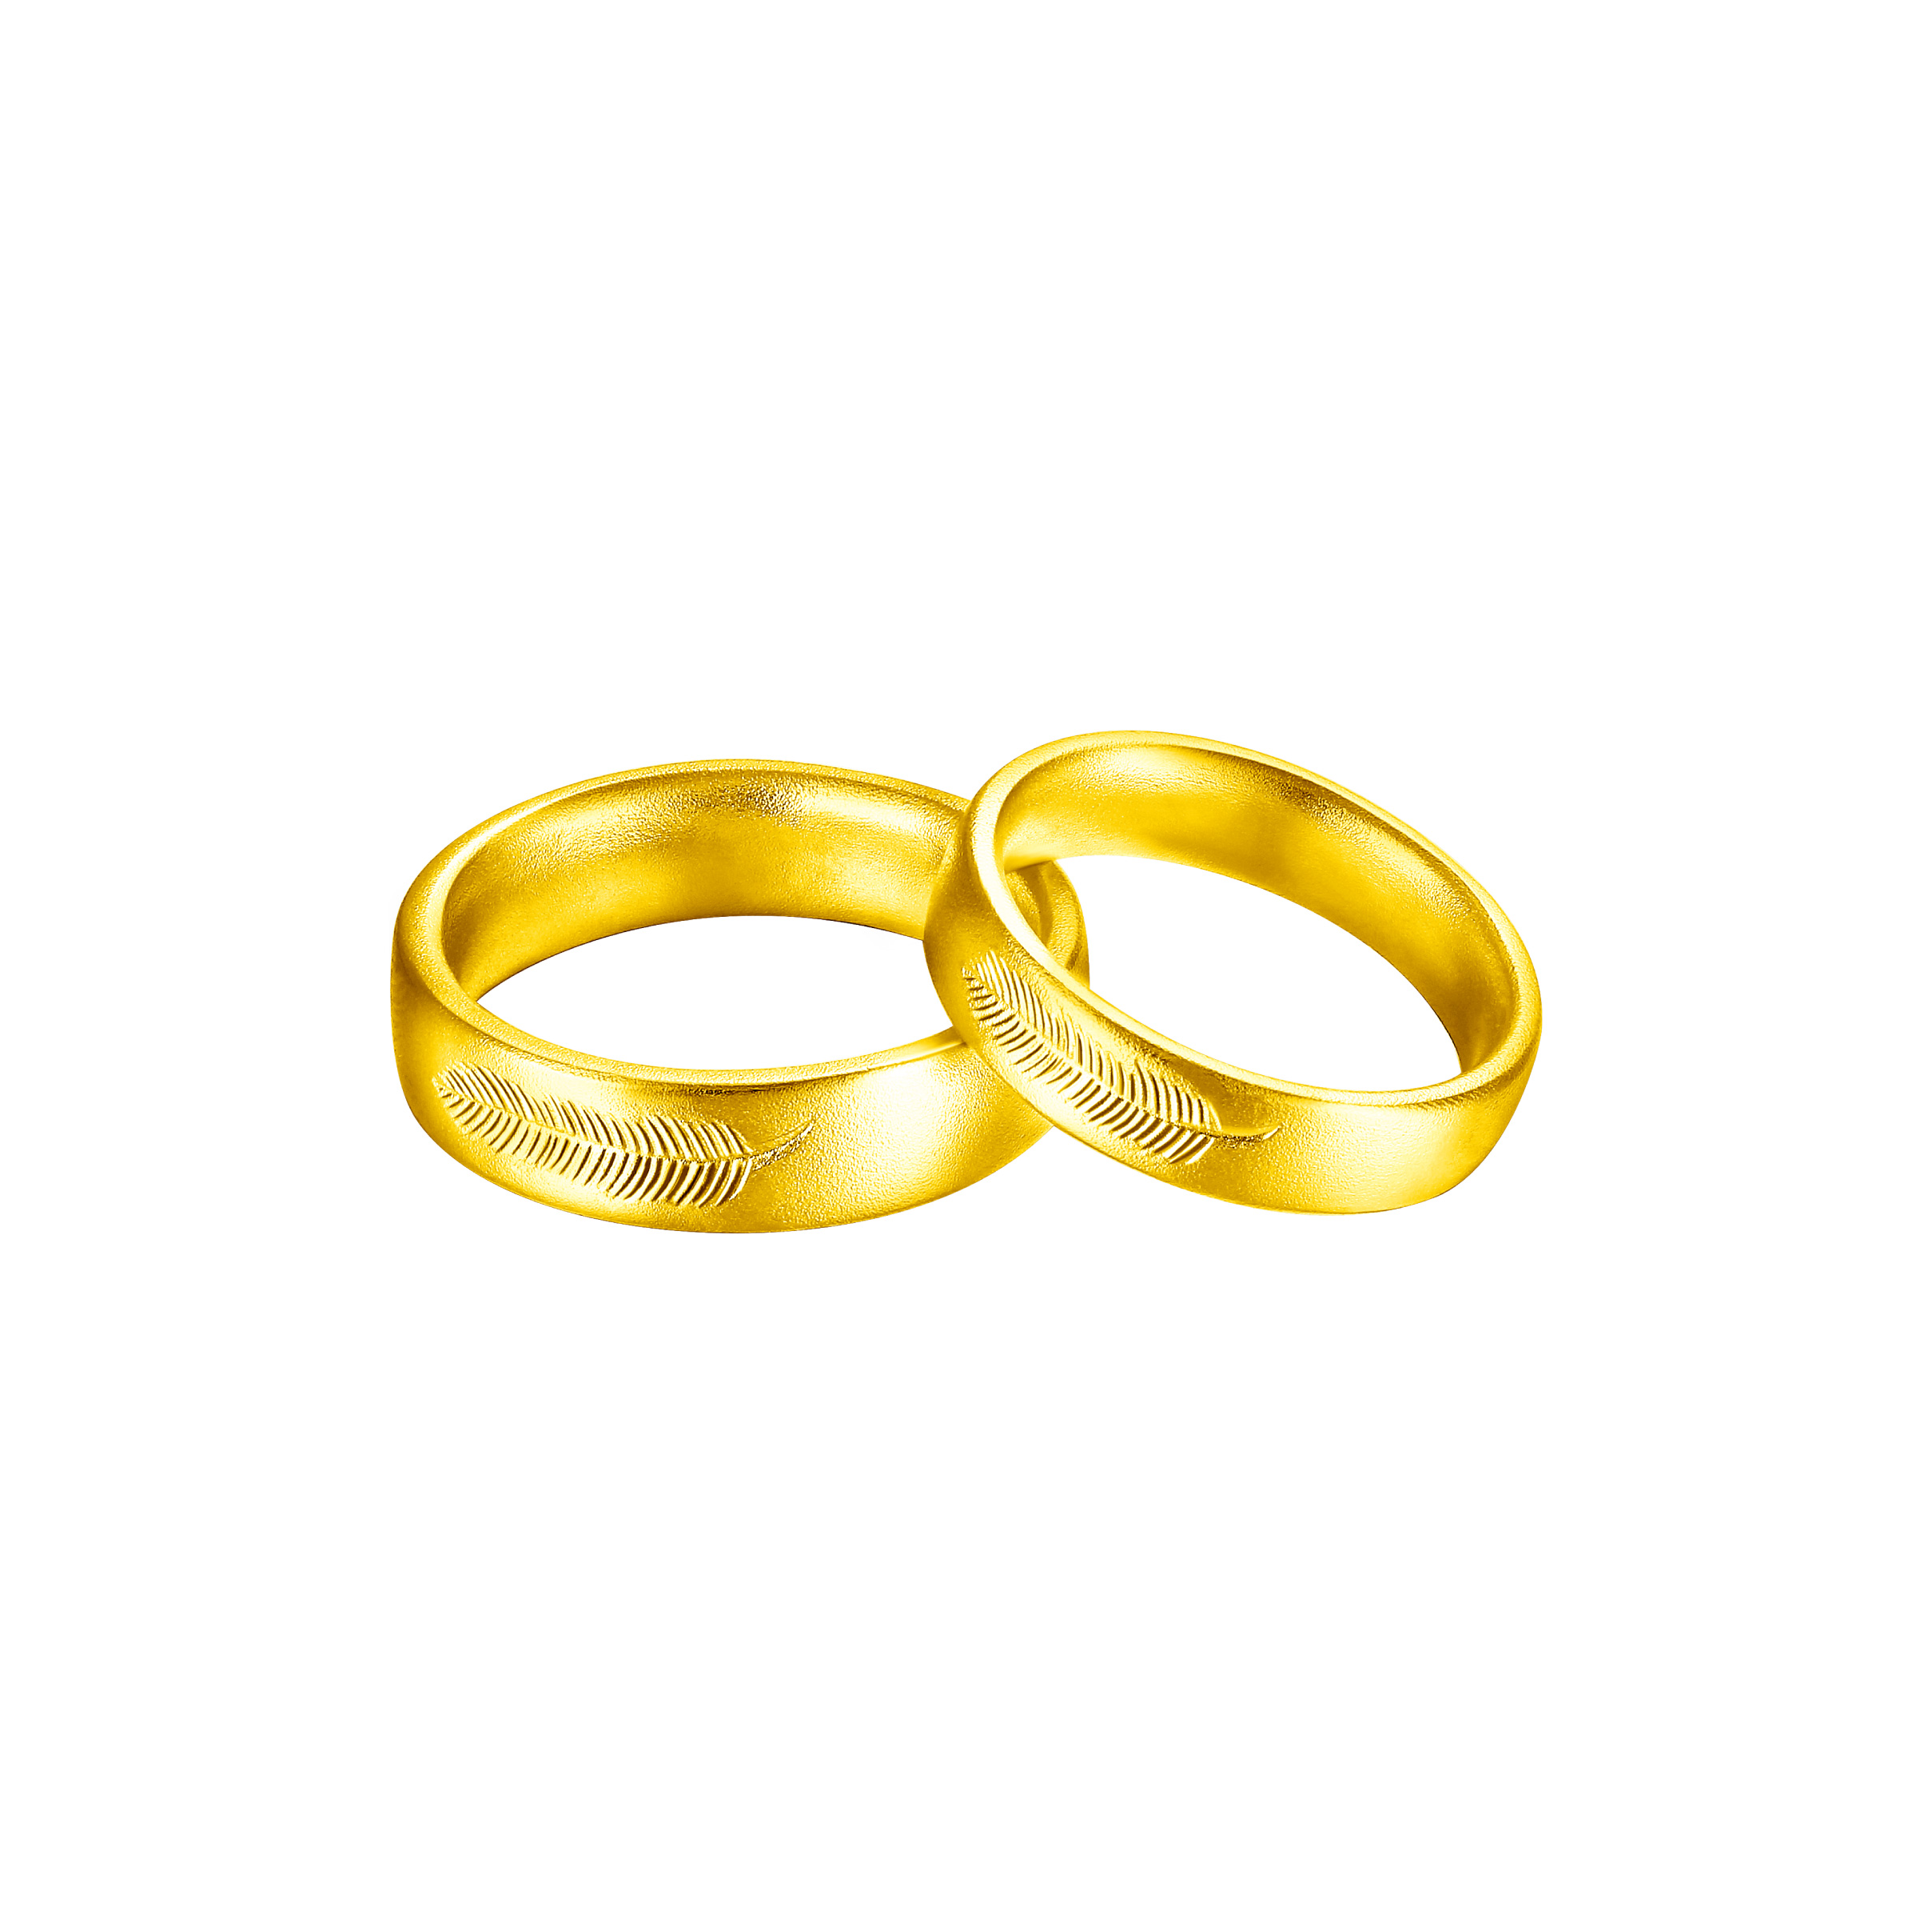 Antique Gold "Health and Happiness" Gold Couple Rings